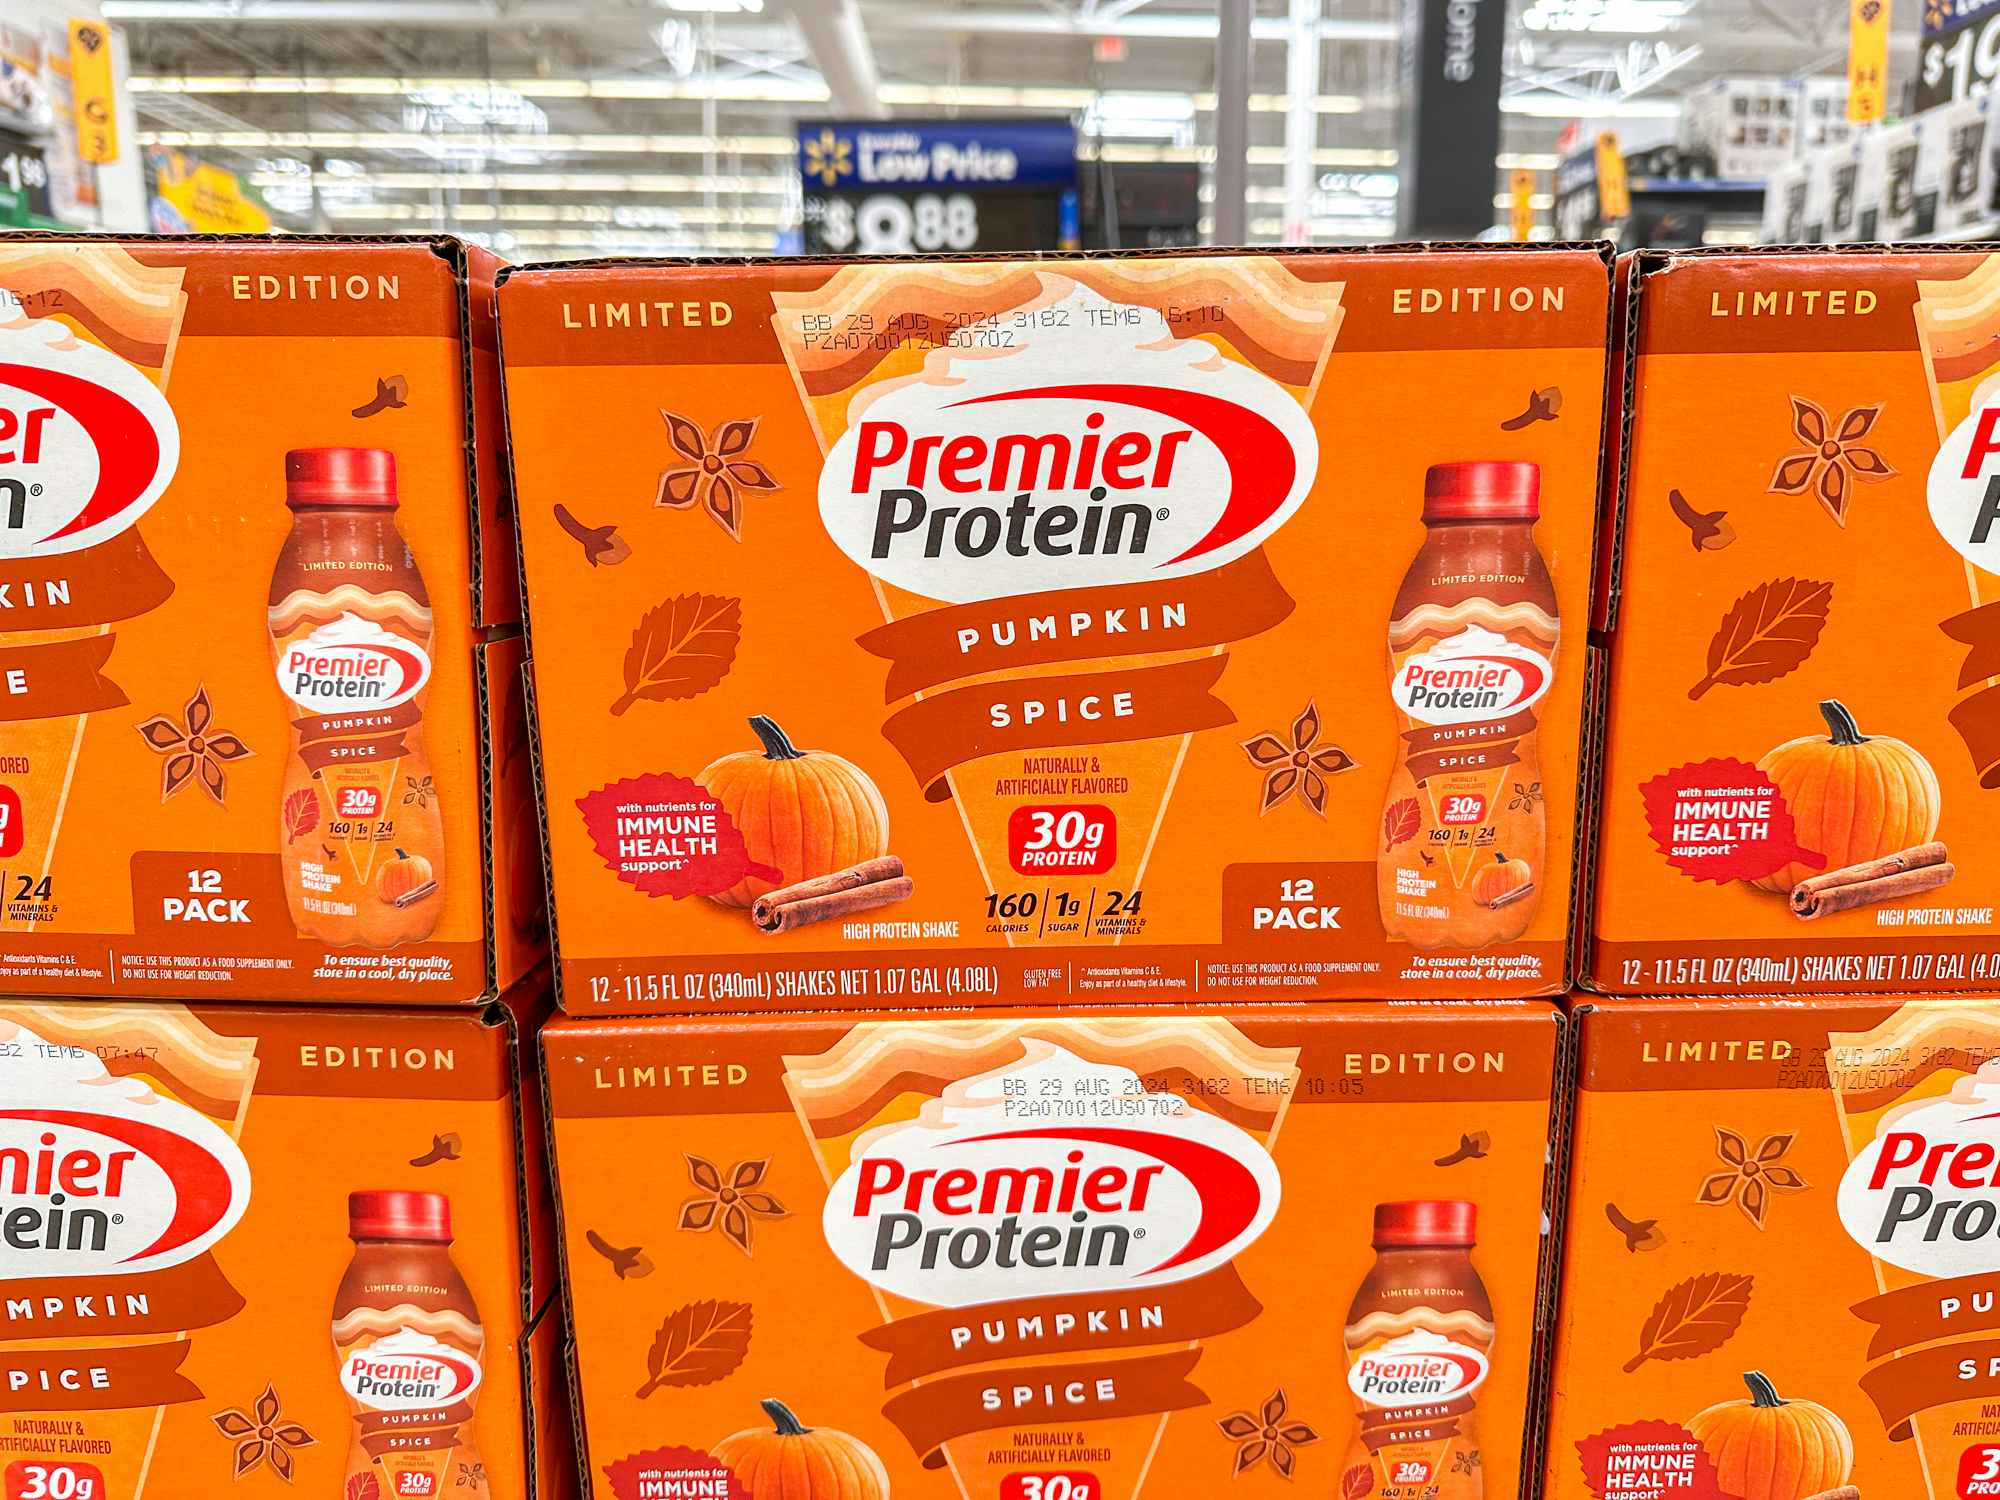 Premier Protein, Protein Shake, Caramel - 11.5 Oz (Pack of 32), 32 packs -  Fry's Food Stores